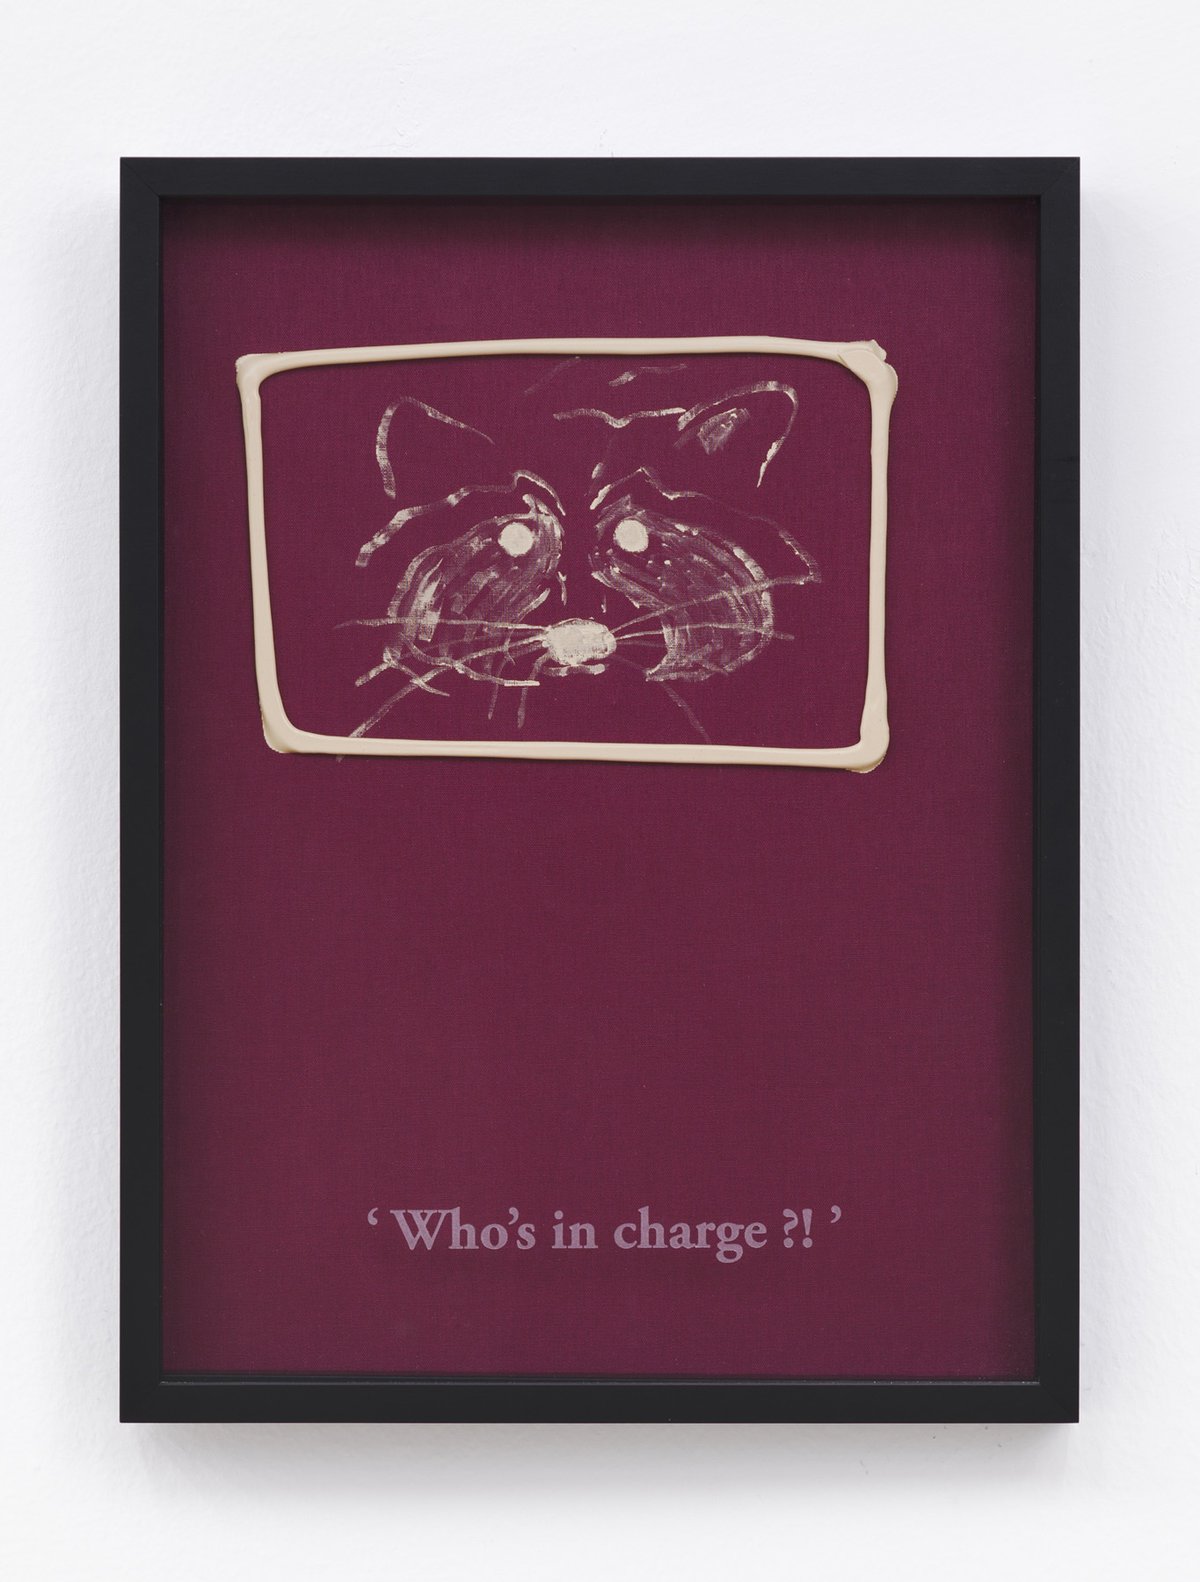 Philipp Timischl&quot;Who&#x27;s in charge?!&quot; (Burgundy/Unbleached Titanium), 2017Acrylic on linen and glass-engraved object frame40.1 x 32.1 cm